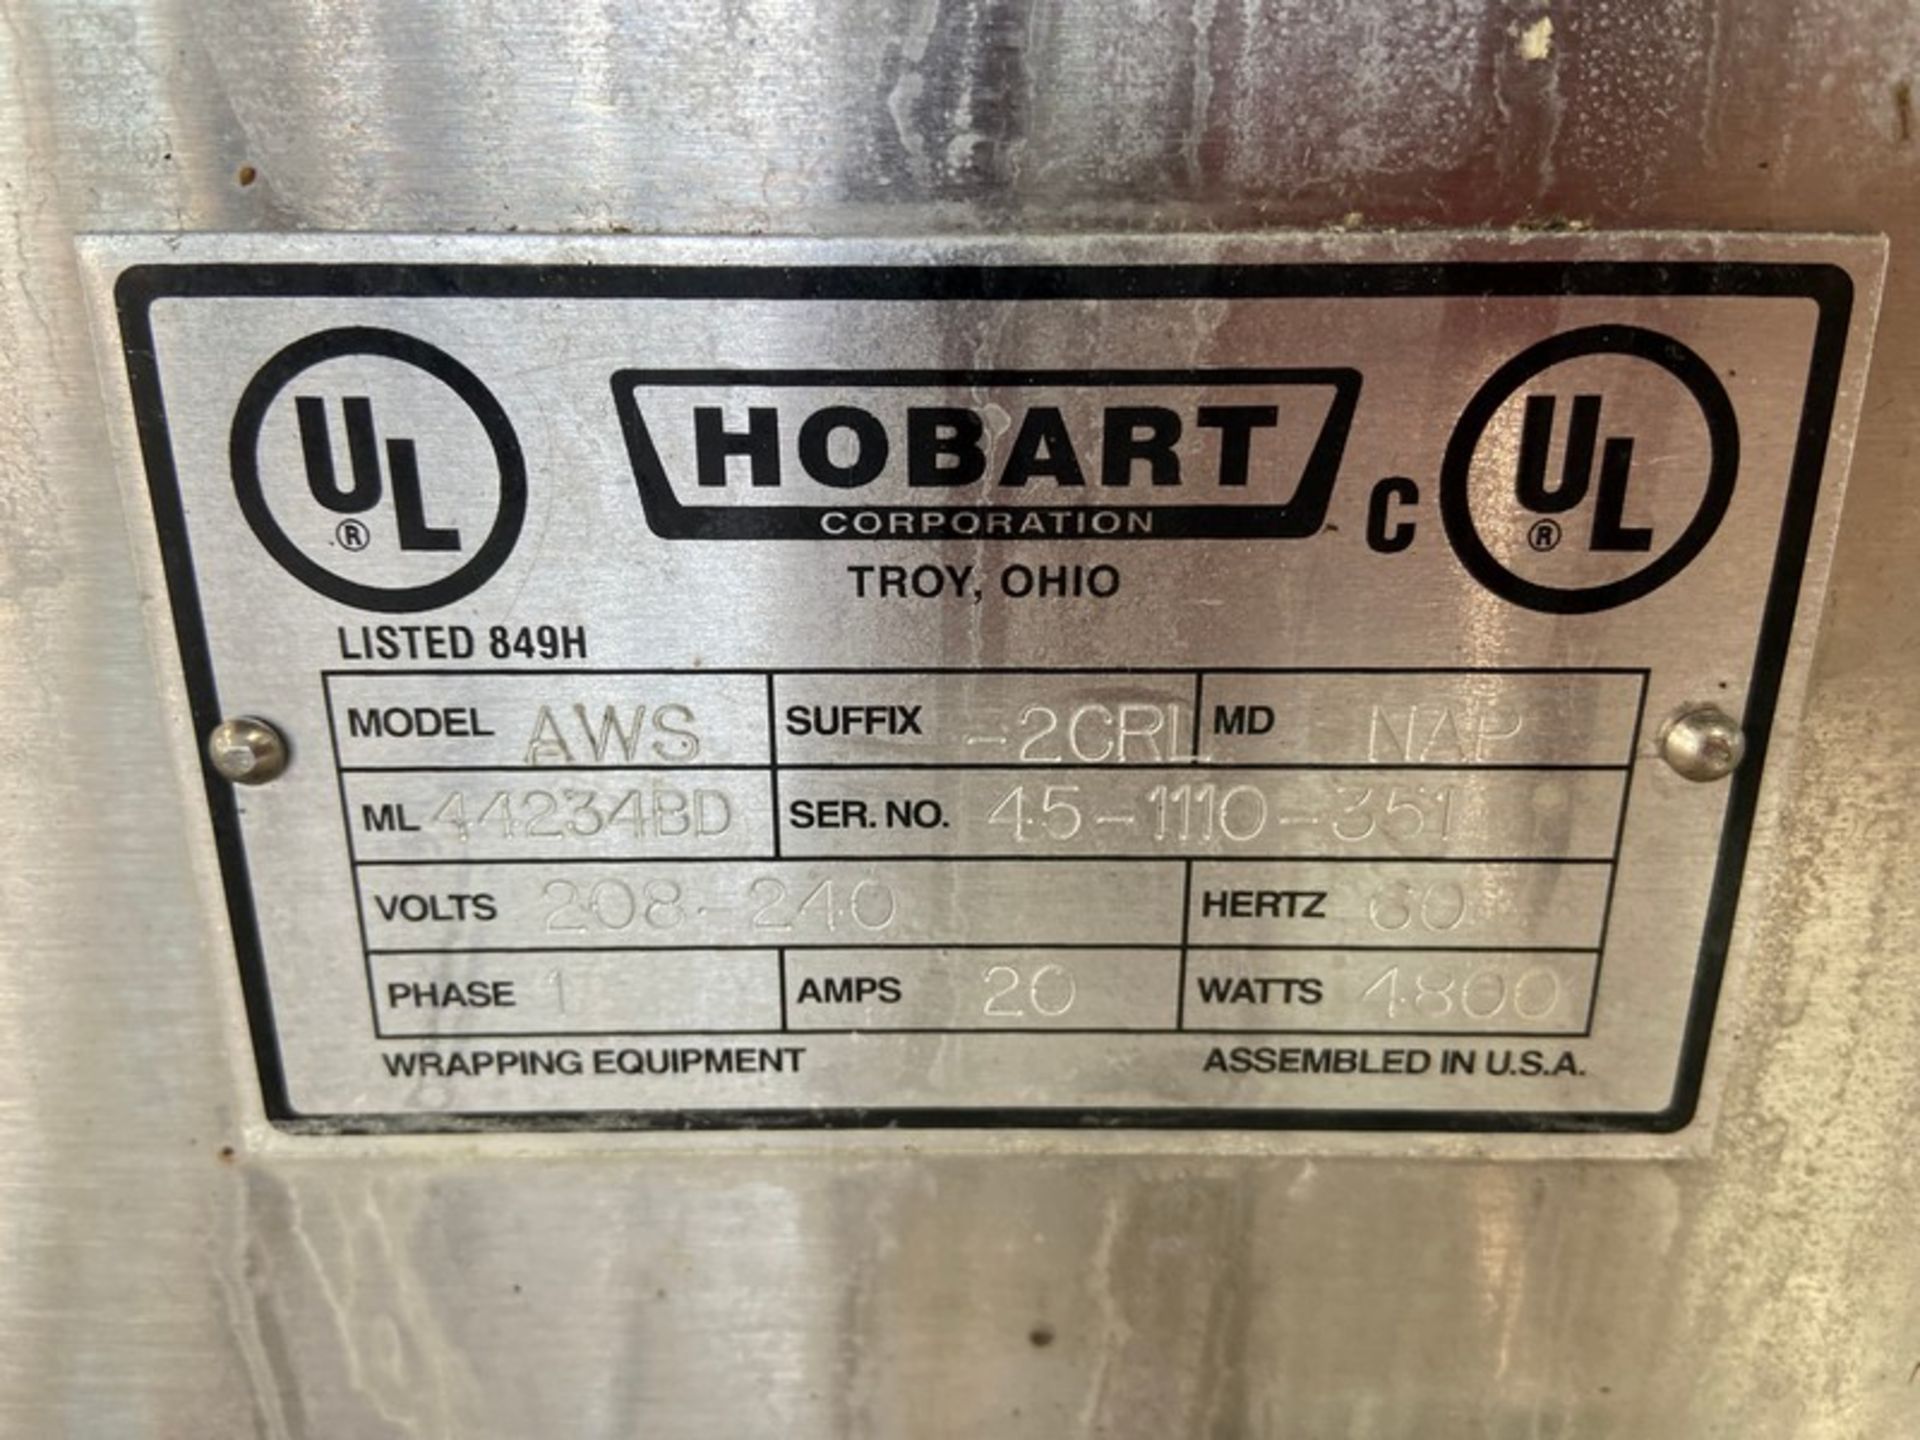 Hobart AWS Automatic Wrapping Station, M/N AWS, S/N 45-1110-351, 208-240 Volts, 3 Phase, with - Image 7 of 11